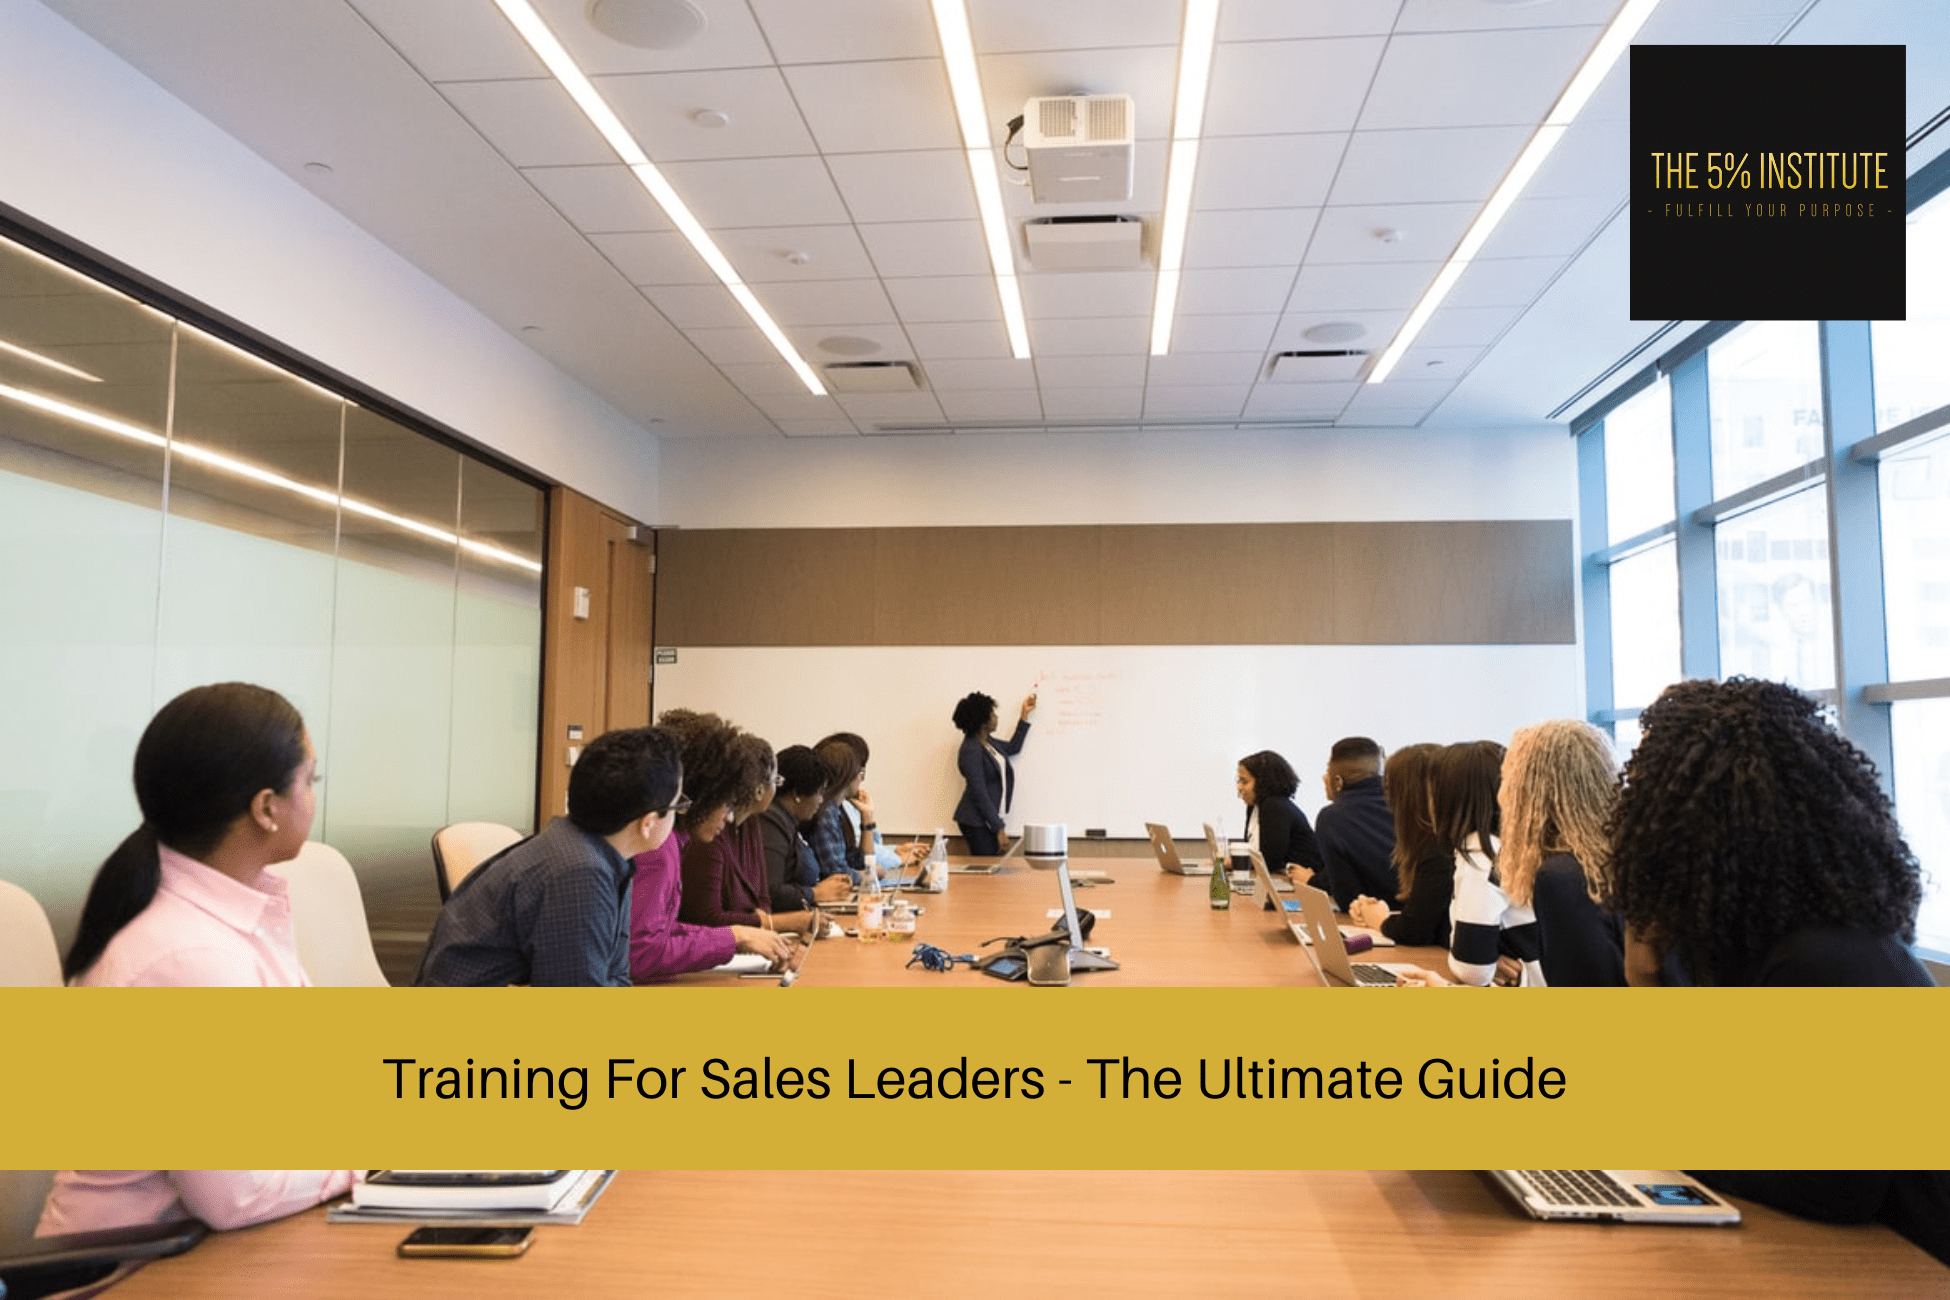 Training For Sales Leaders - The Ultimate Guide